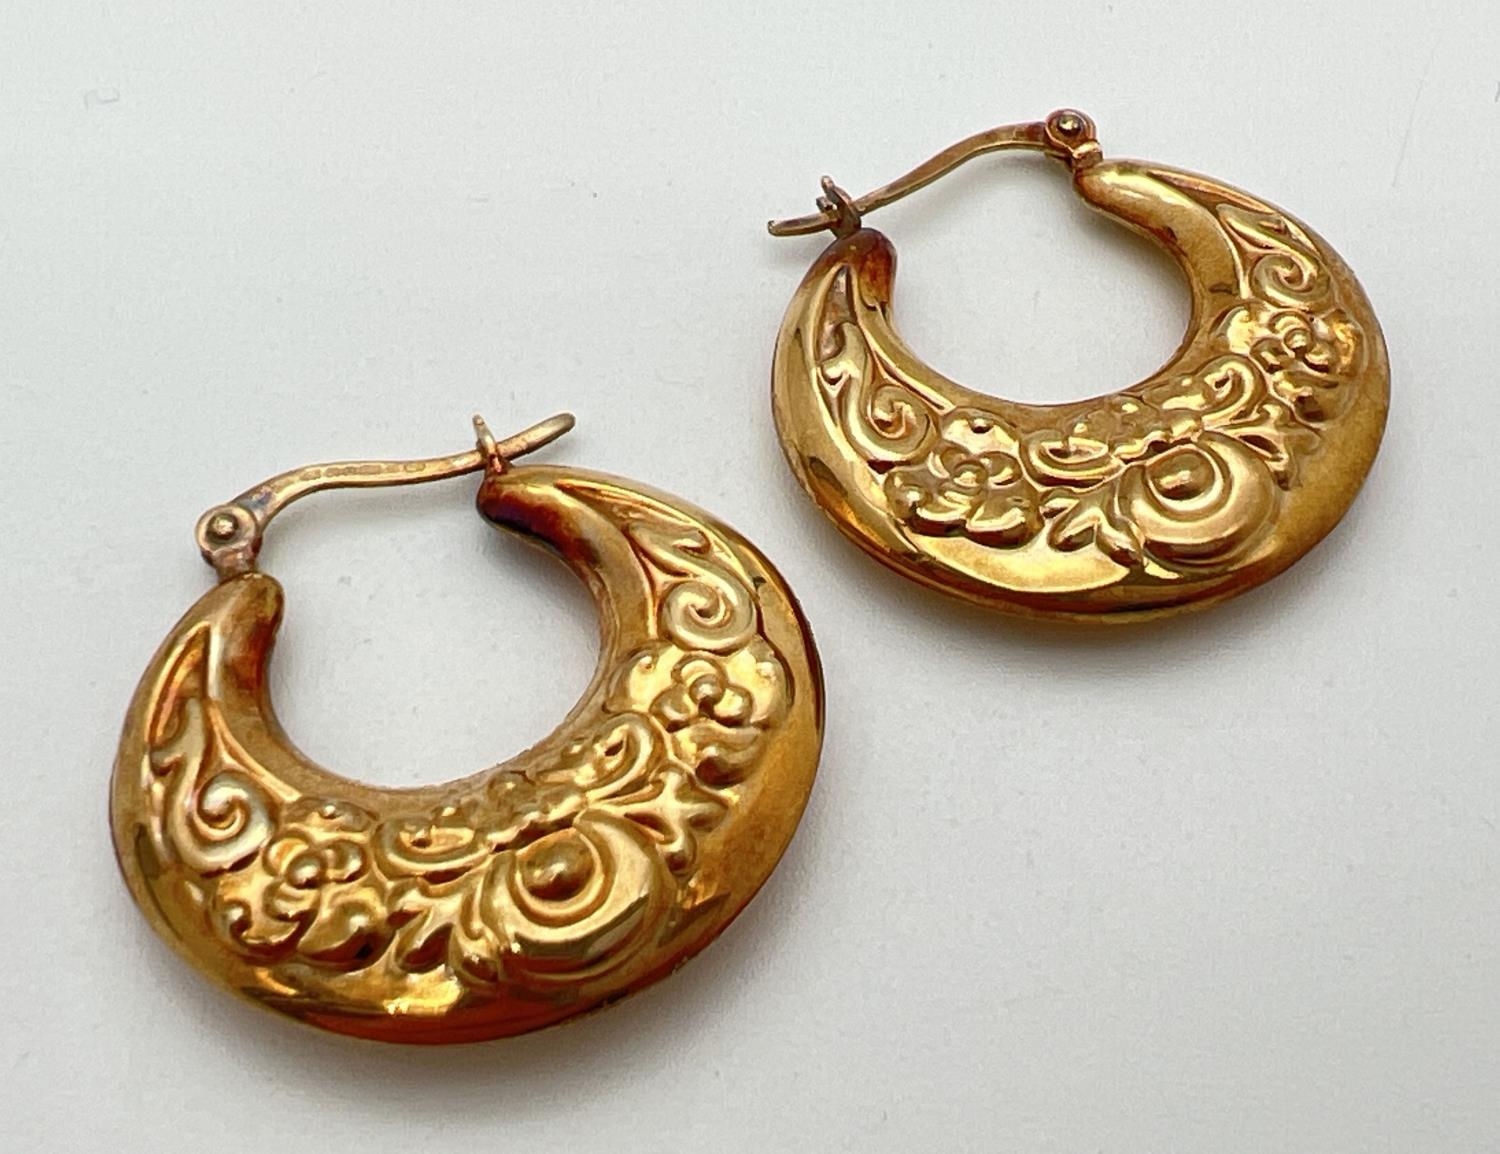 A pair of 9ct gold creole style earrings with floral pattern and hinged posts. Approx. 2.75cm